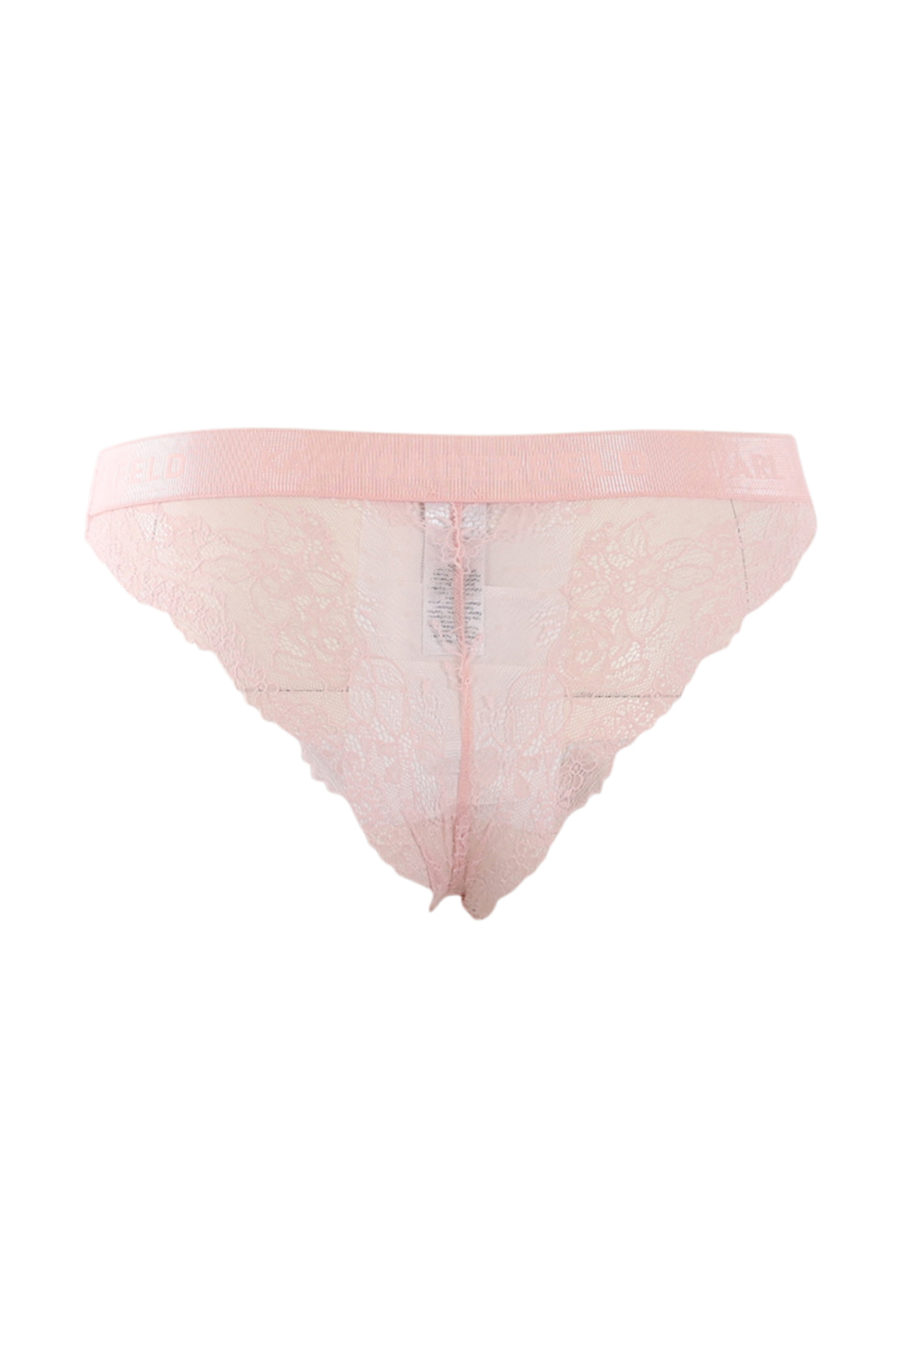 Pink briefs with lace detail - IMG 0611